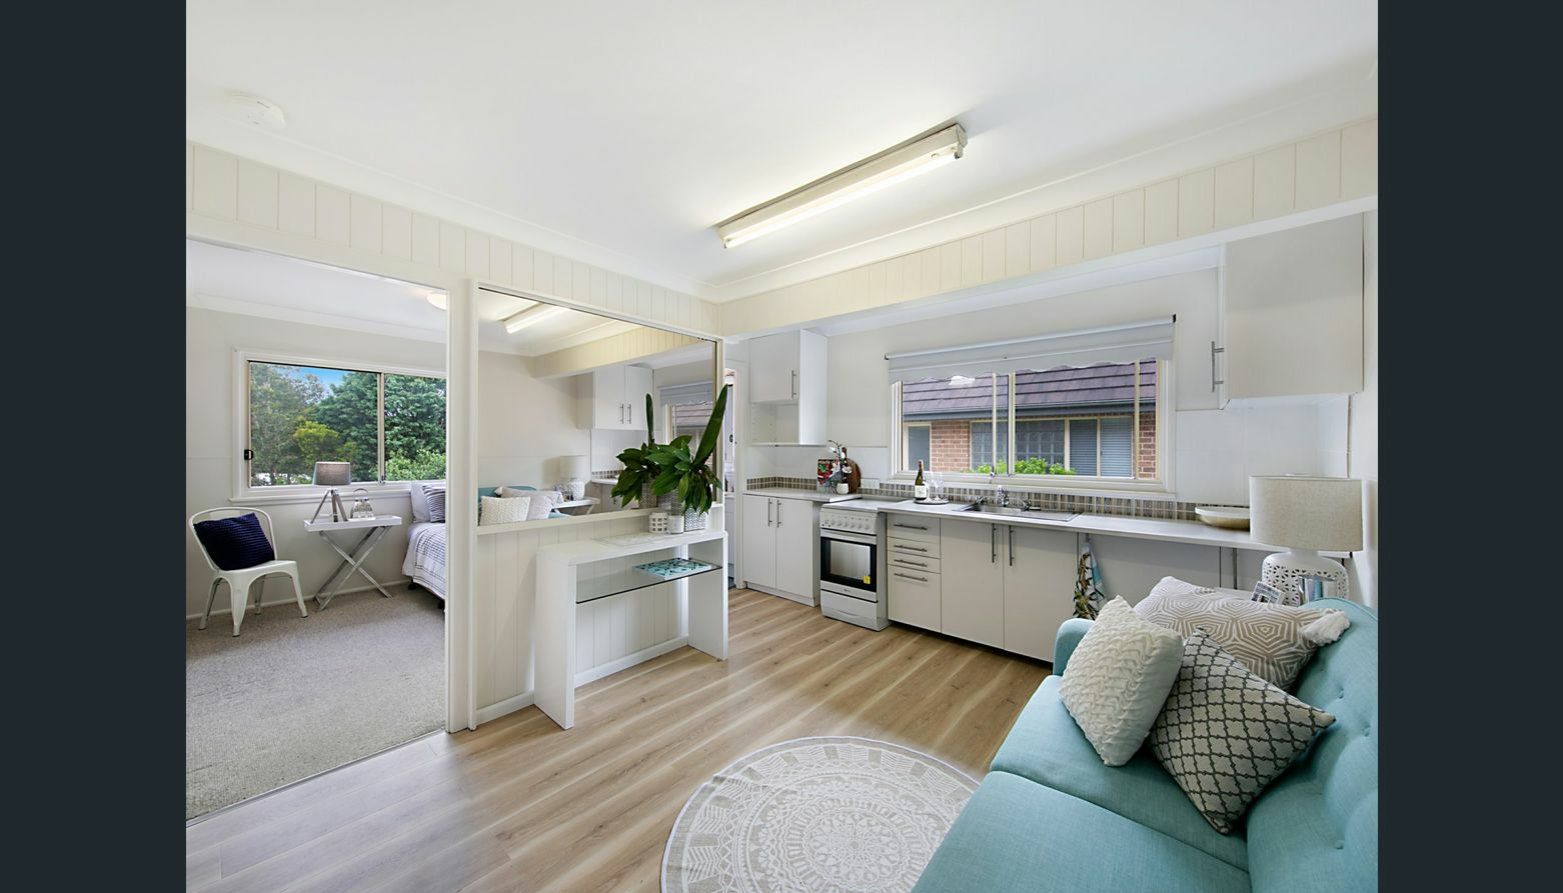 2 bedrooms Apartment / Unit / Flat in 8/14 Elizabeth Drive NORAVILLE NSW, 2263